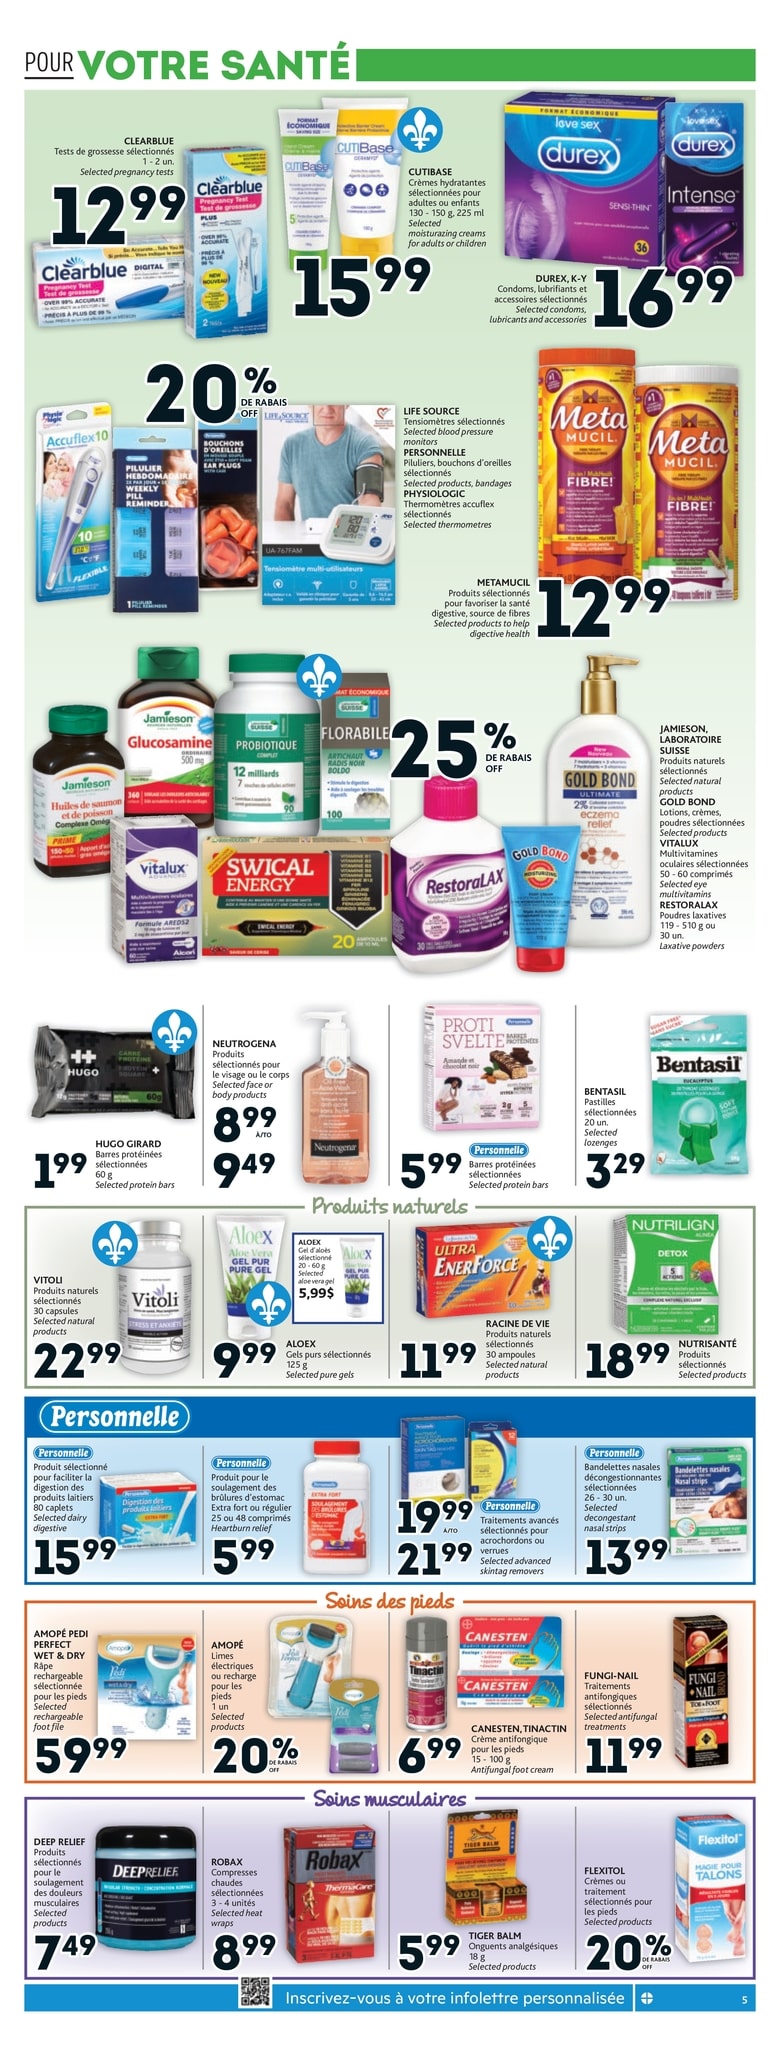 Brunet - Weekly Flyer Specials - Page 6